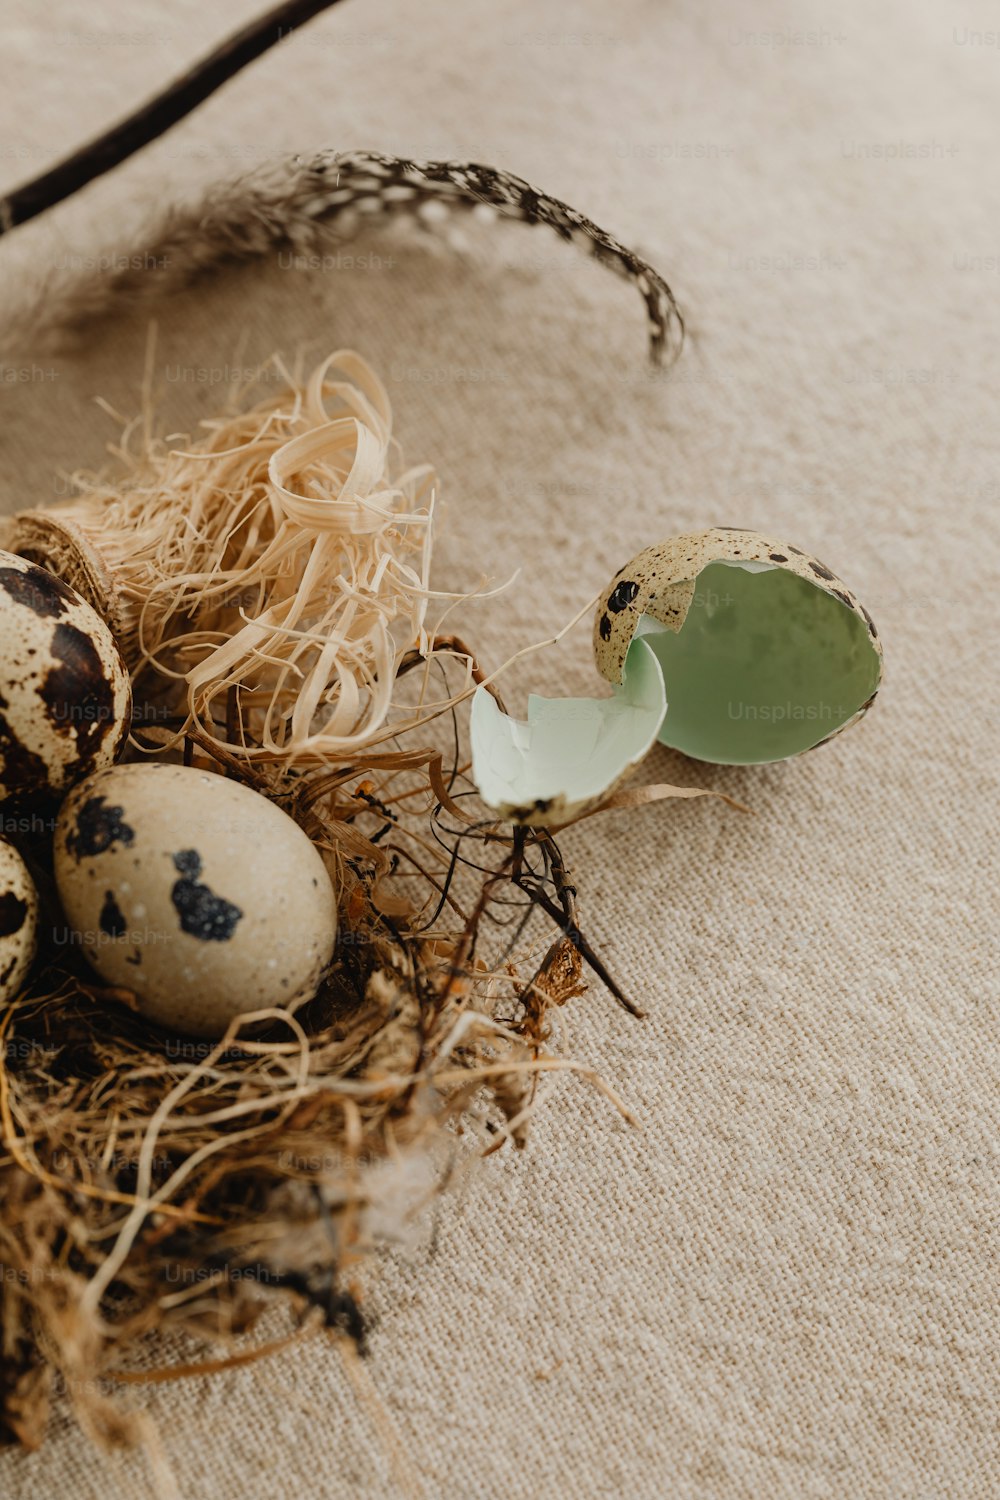 a bird nest with eggs and a bird's egg in it